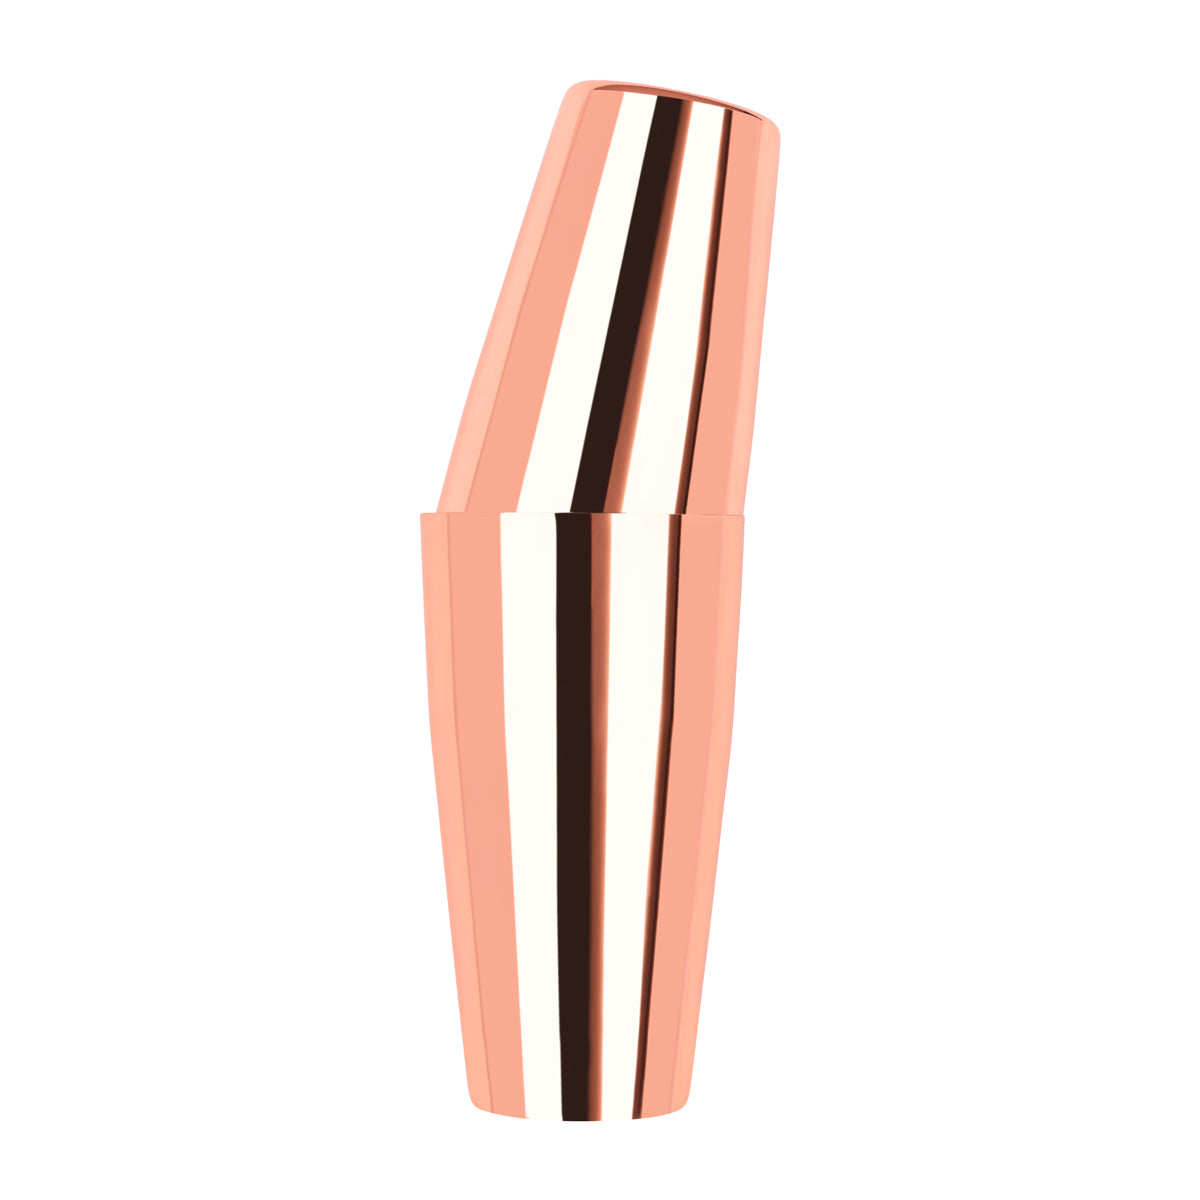 Toby Boston Shaker Set - Rose Gold, 500/800Ml from Zanzi. Packed in a gift box and sold in boxes of 1. Hospitality quality at wholesale price with The Flying Fork! 